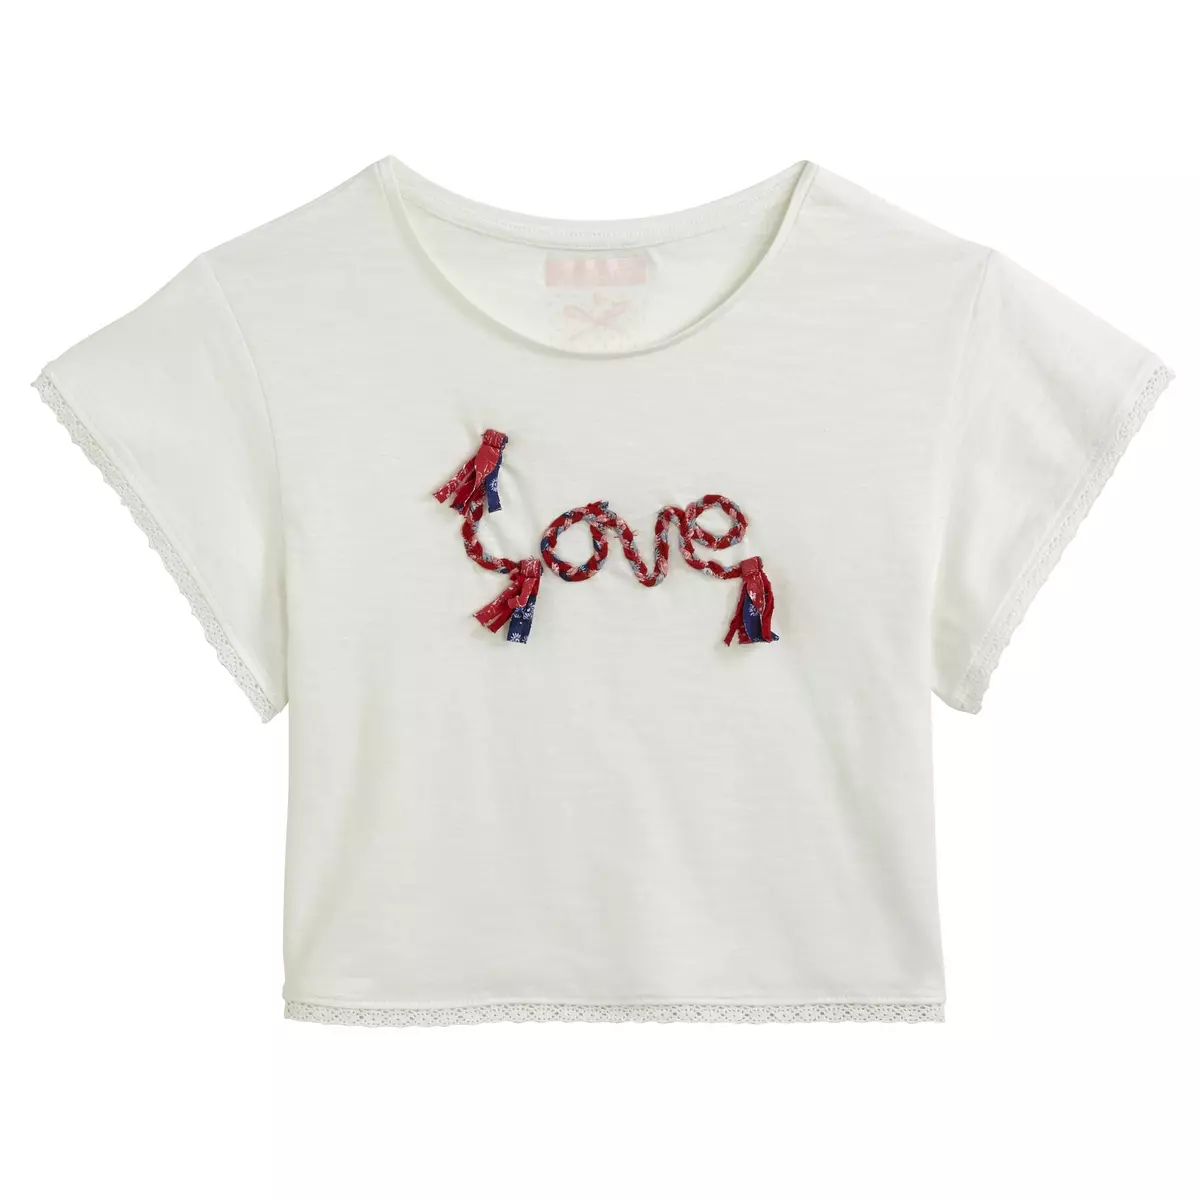 IN EXTENSO Tee-shirt court manches courtes "Love" fille